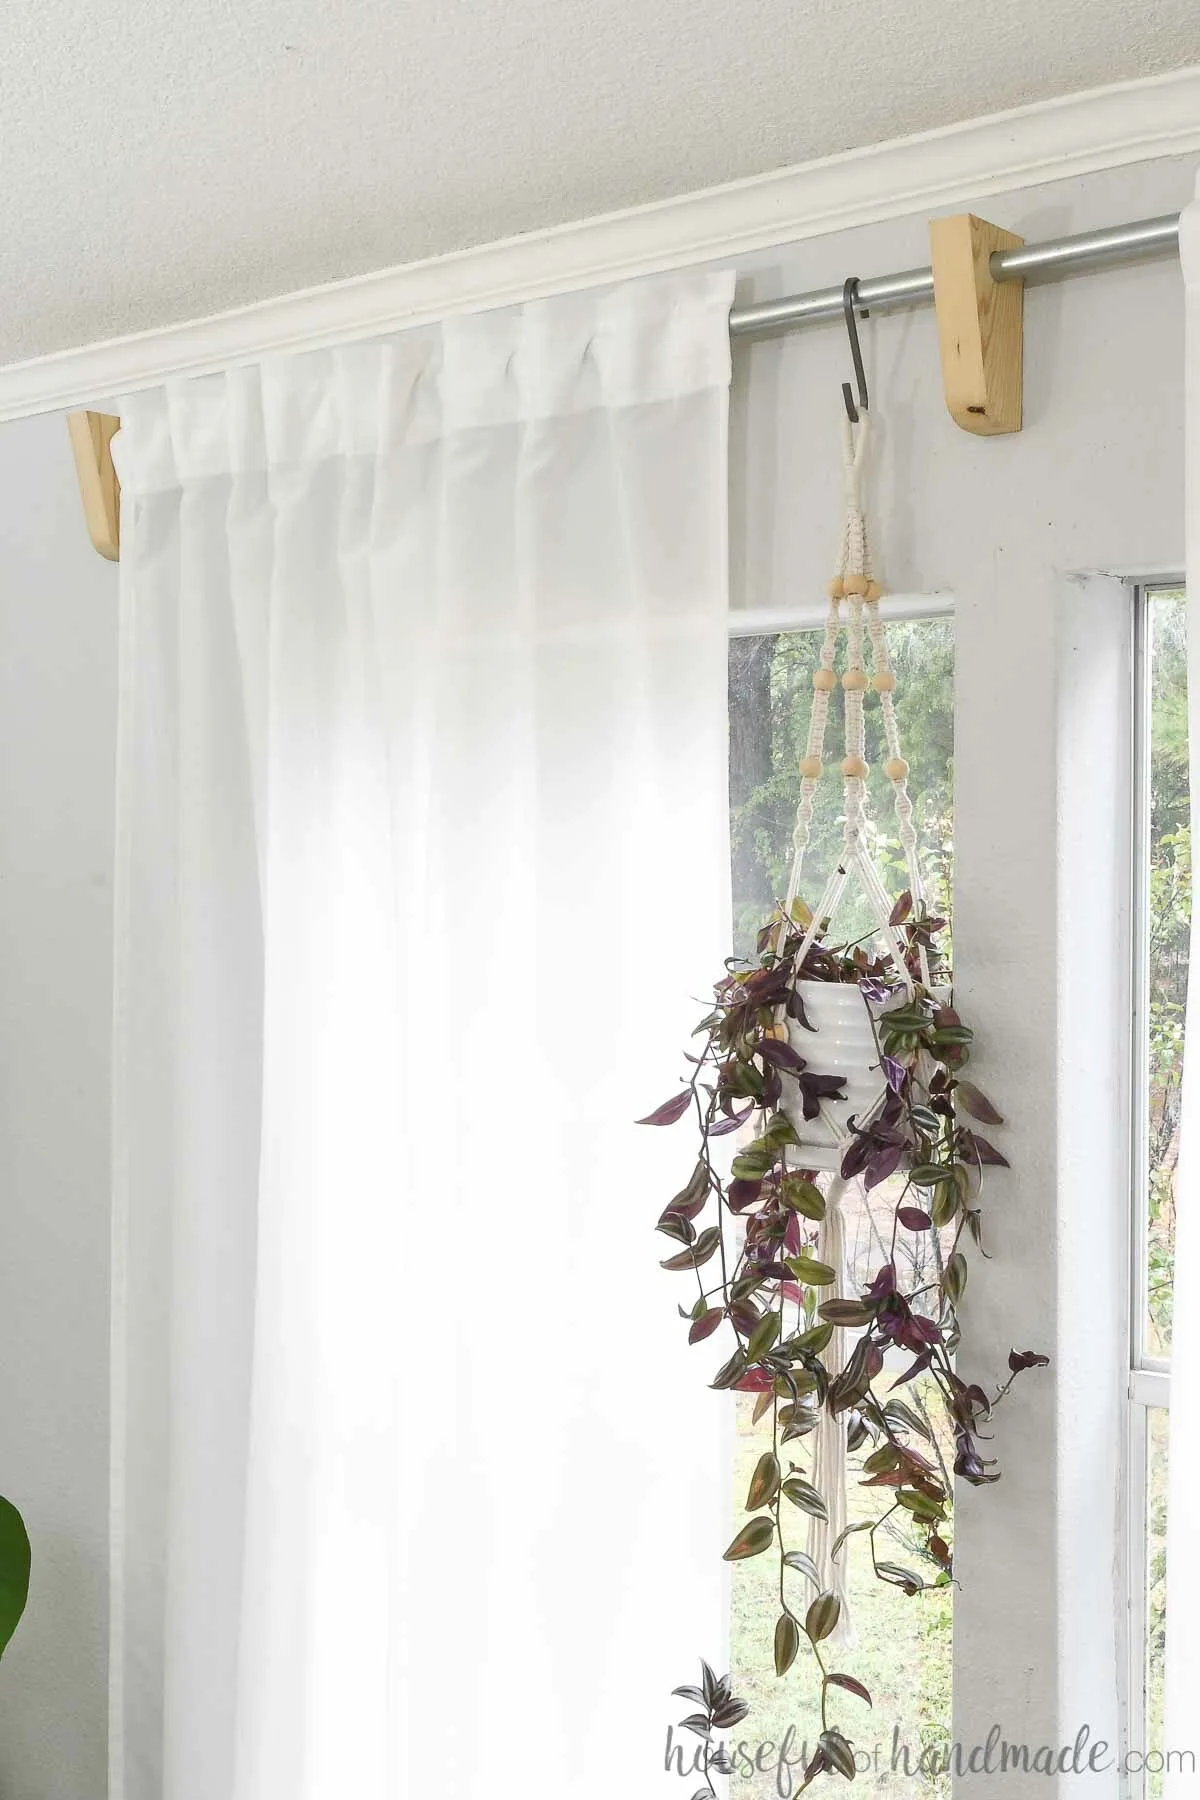 How to install curtain rods – 7 steps to put up a curtain pole yourself